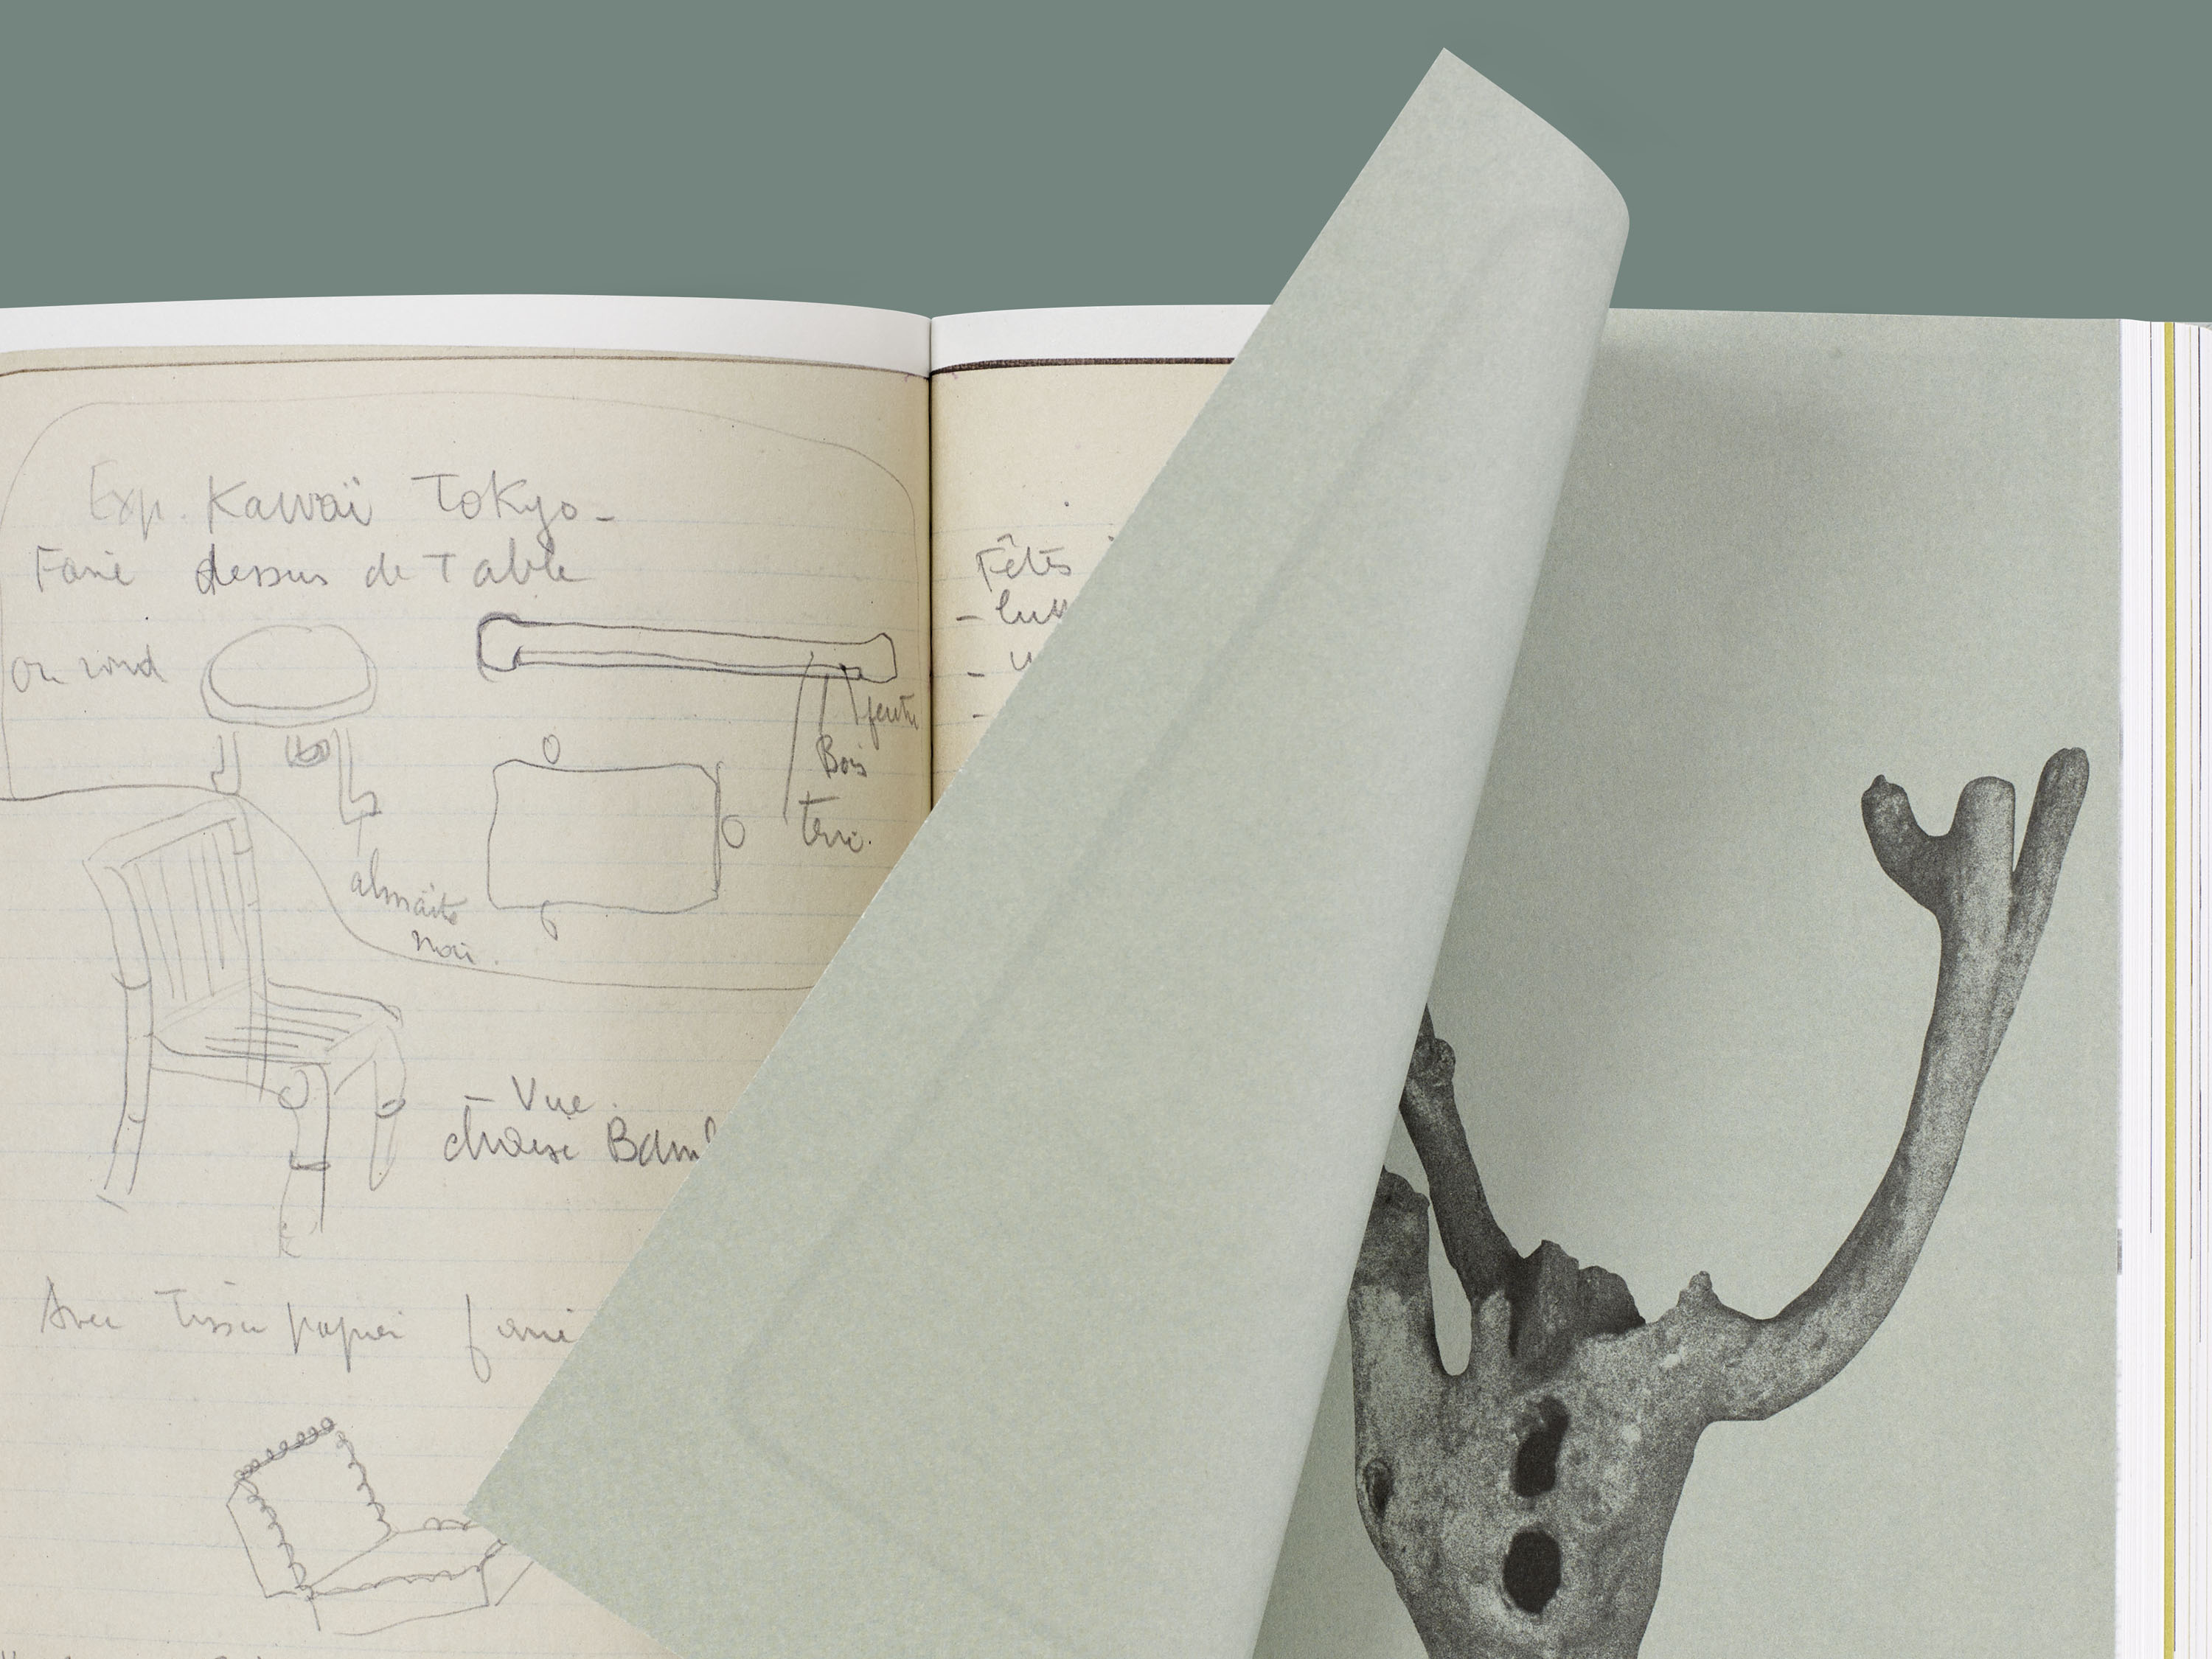 Sketches by Charlotte Perriand Brought to Life